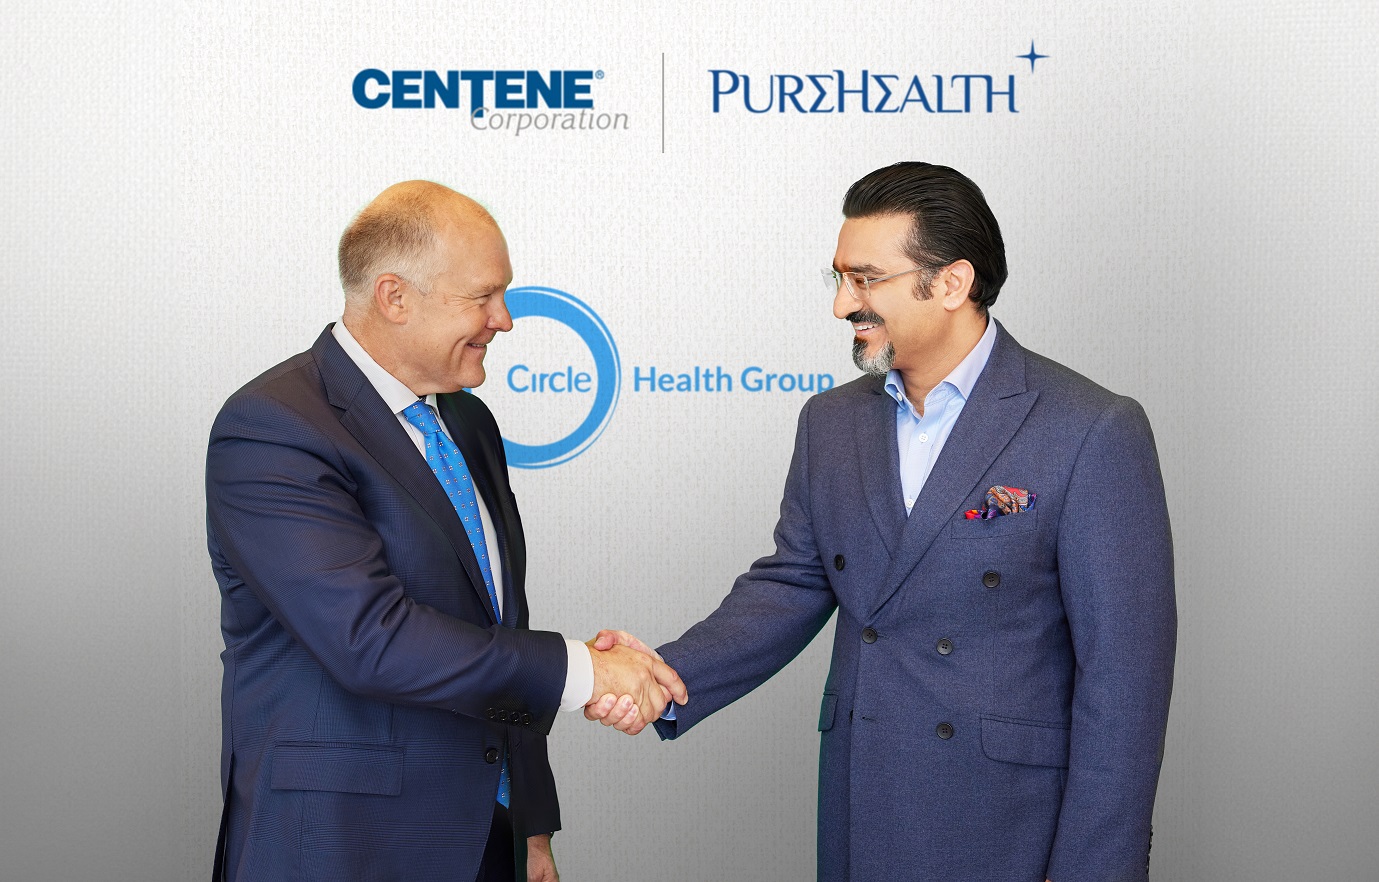 Pure Healthcare Group